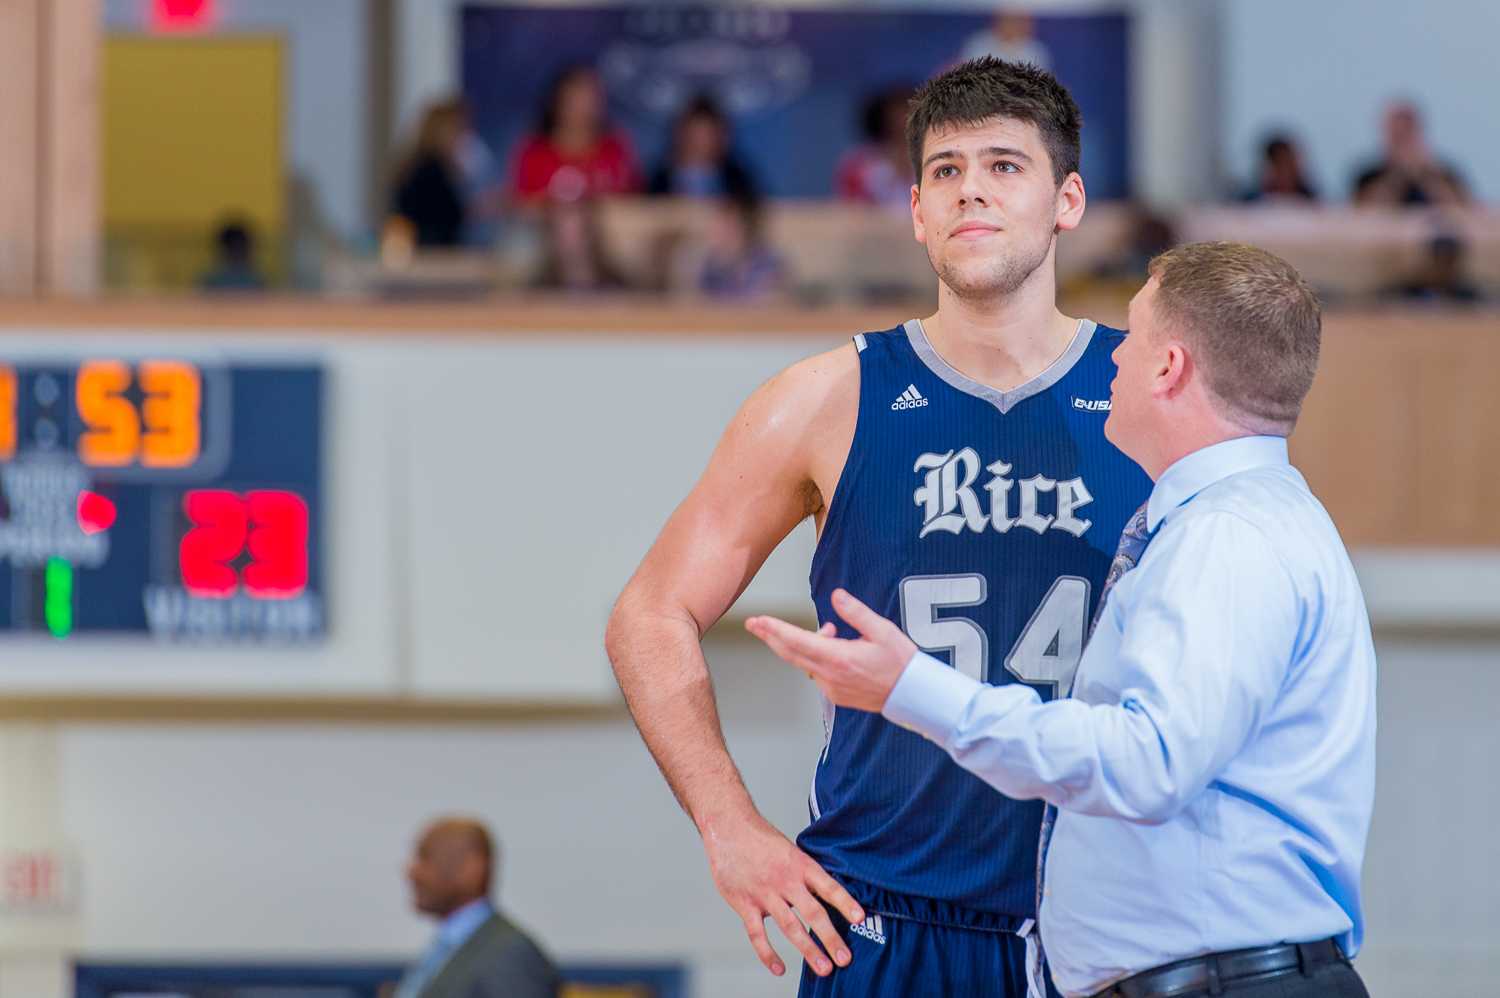 Andrew Drone (54) of the Rice Owls listens to his coach while FAU shoots a free throw.